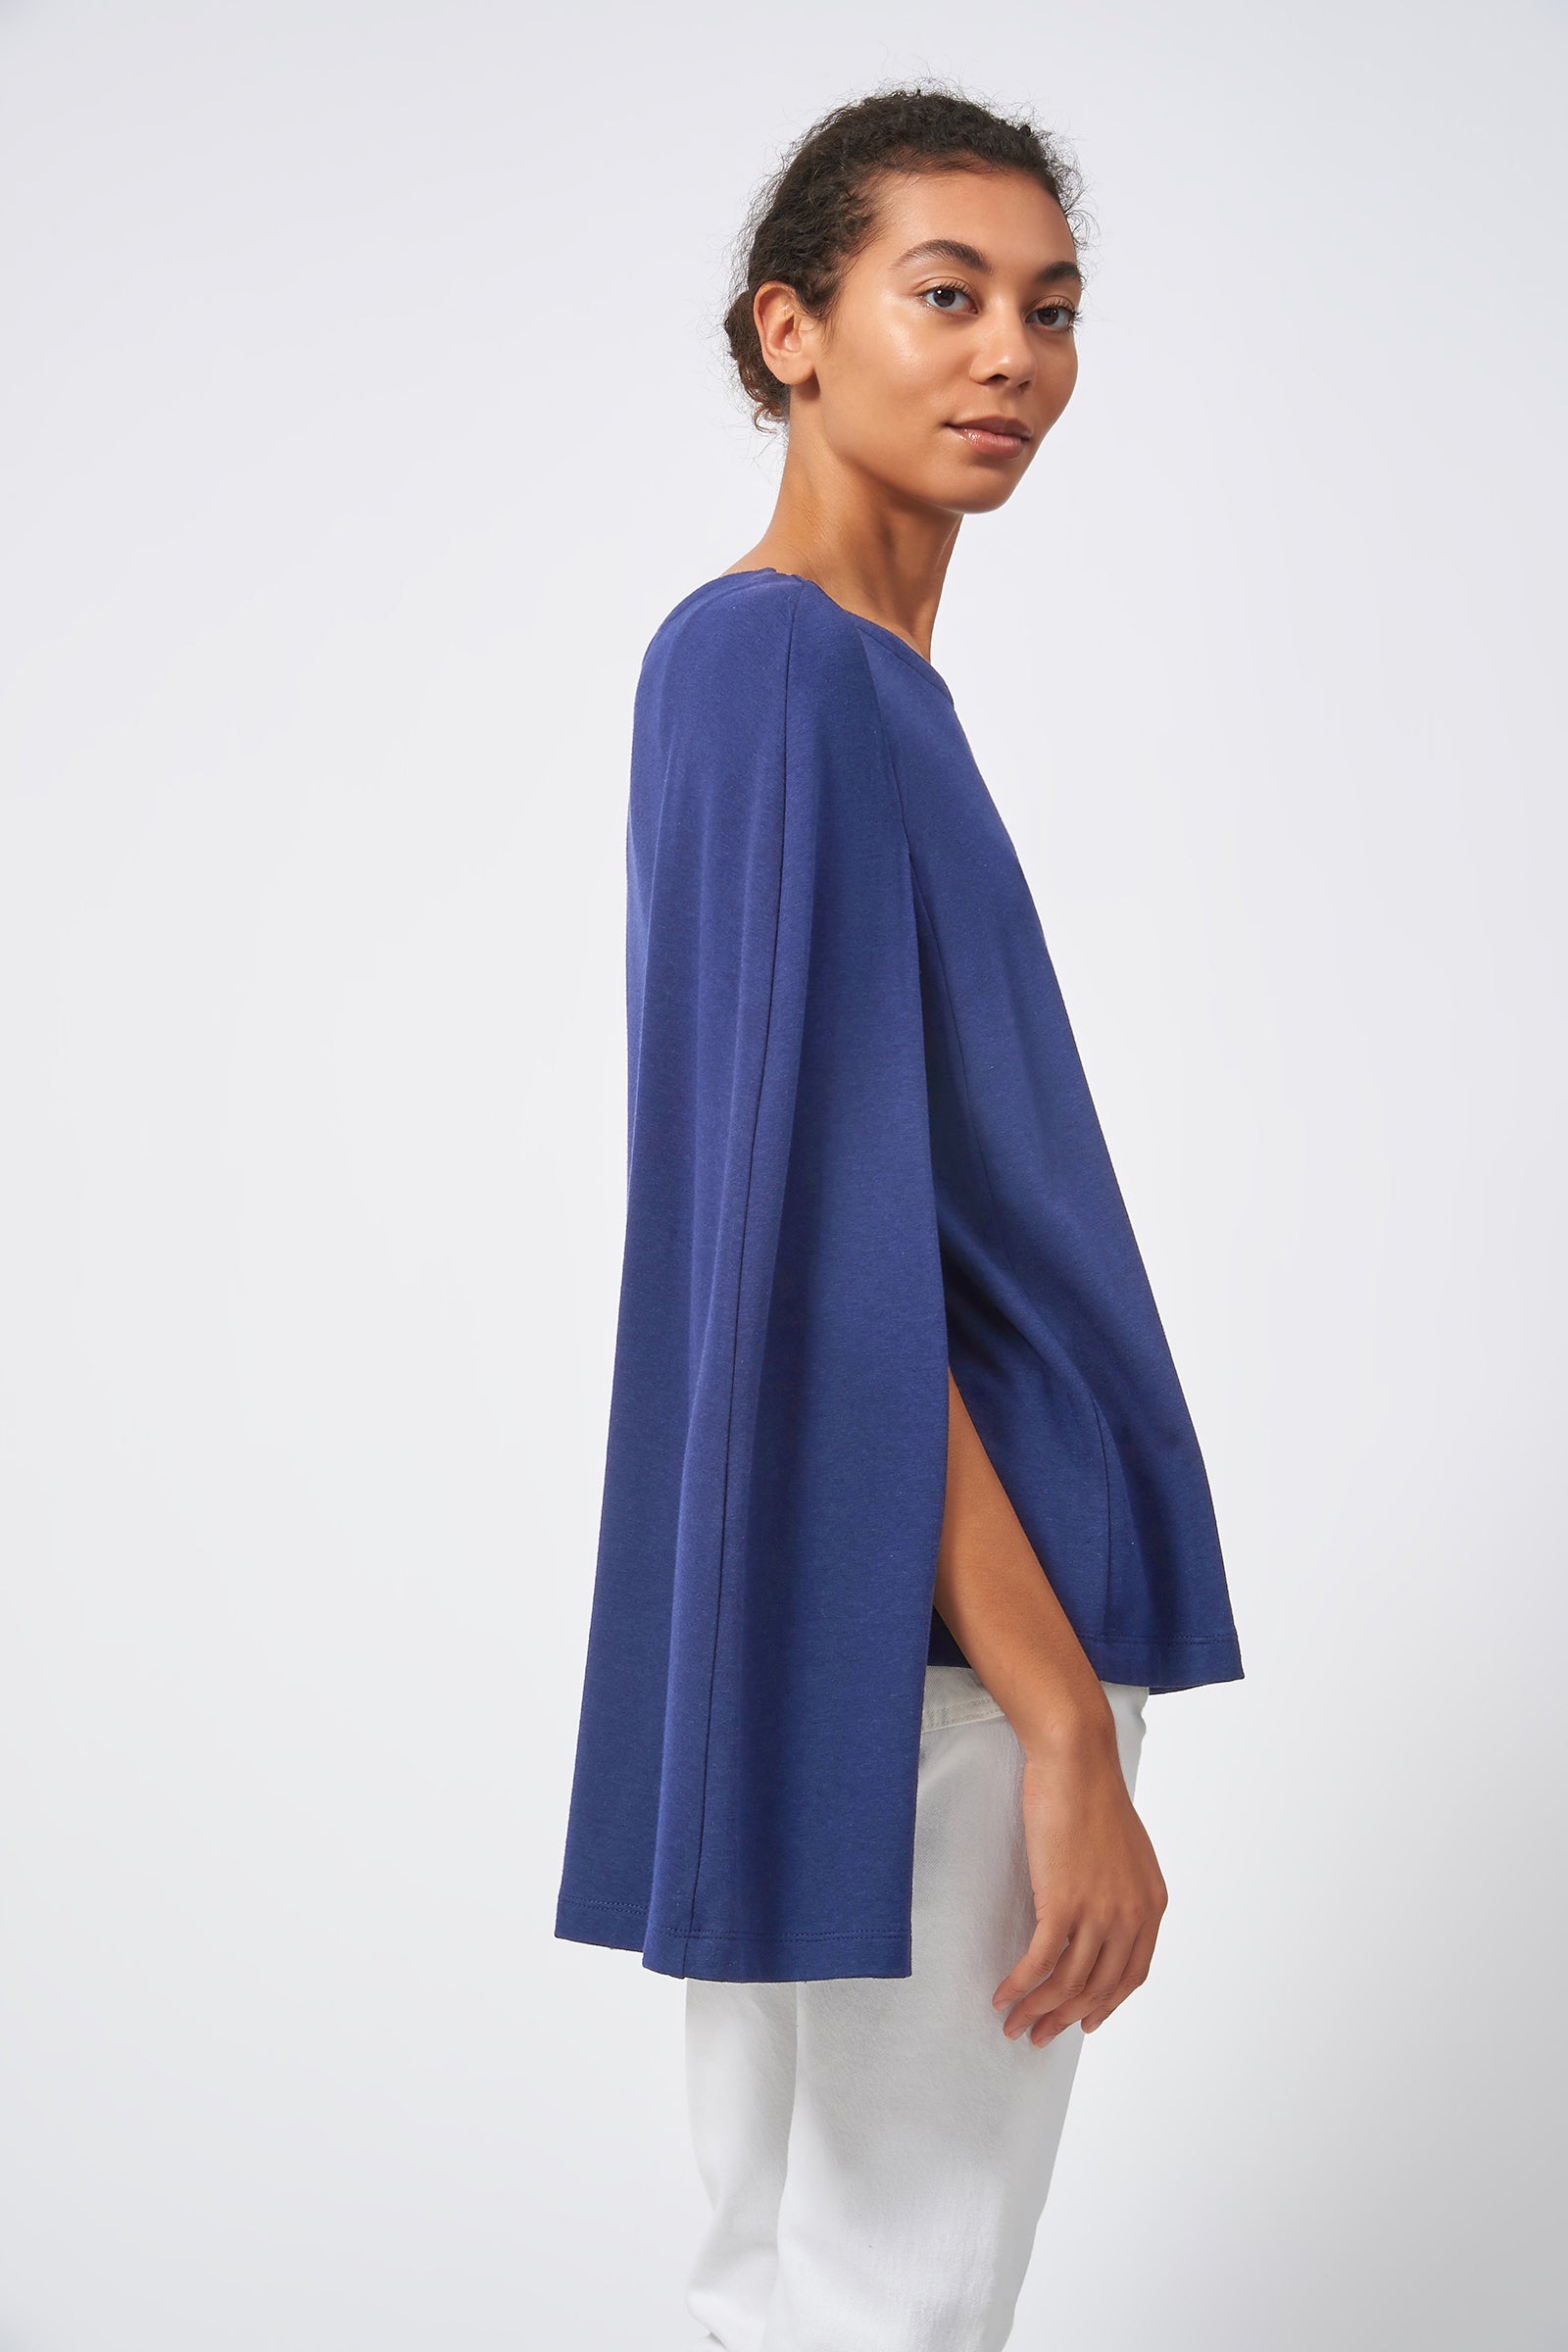 Kal Rieman Cape Sweatshirt in Bamboo Terry Blue image of the full side view